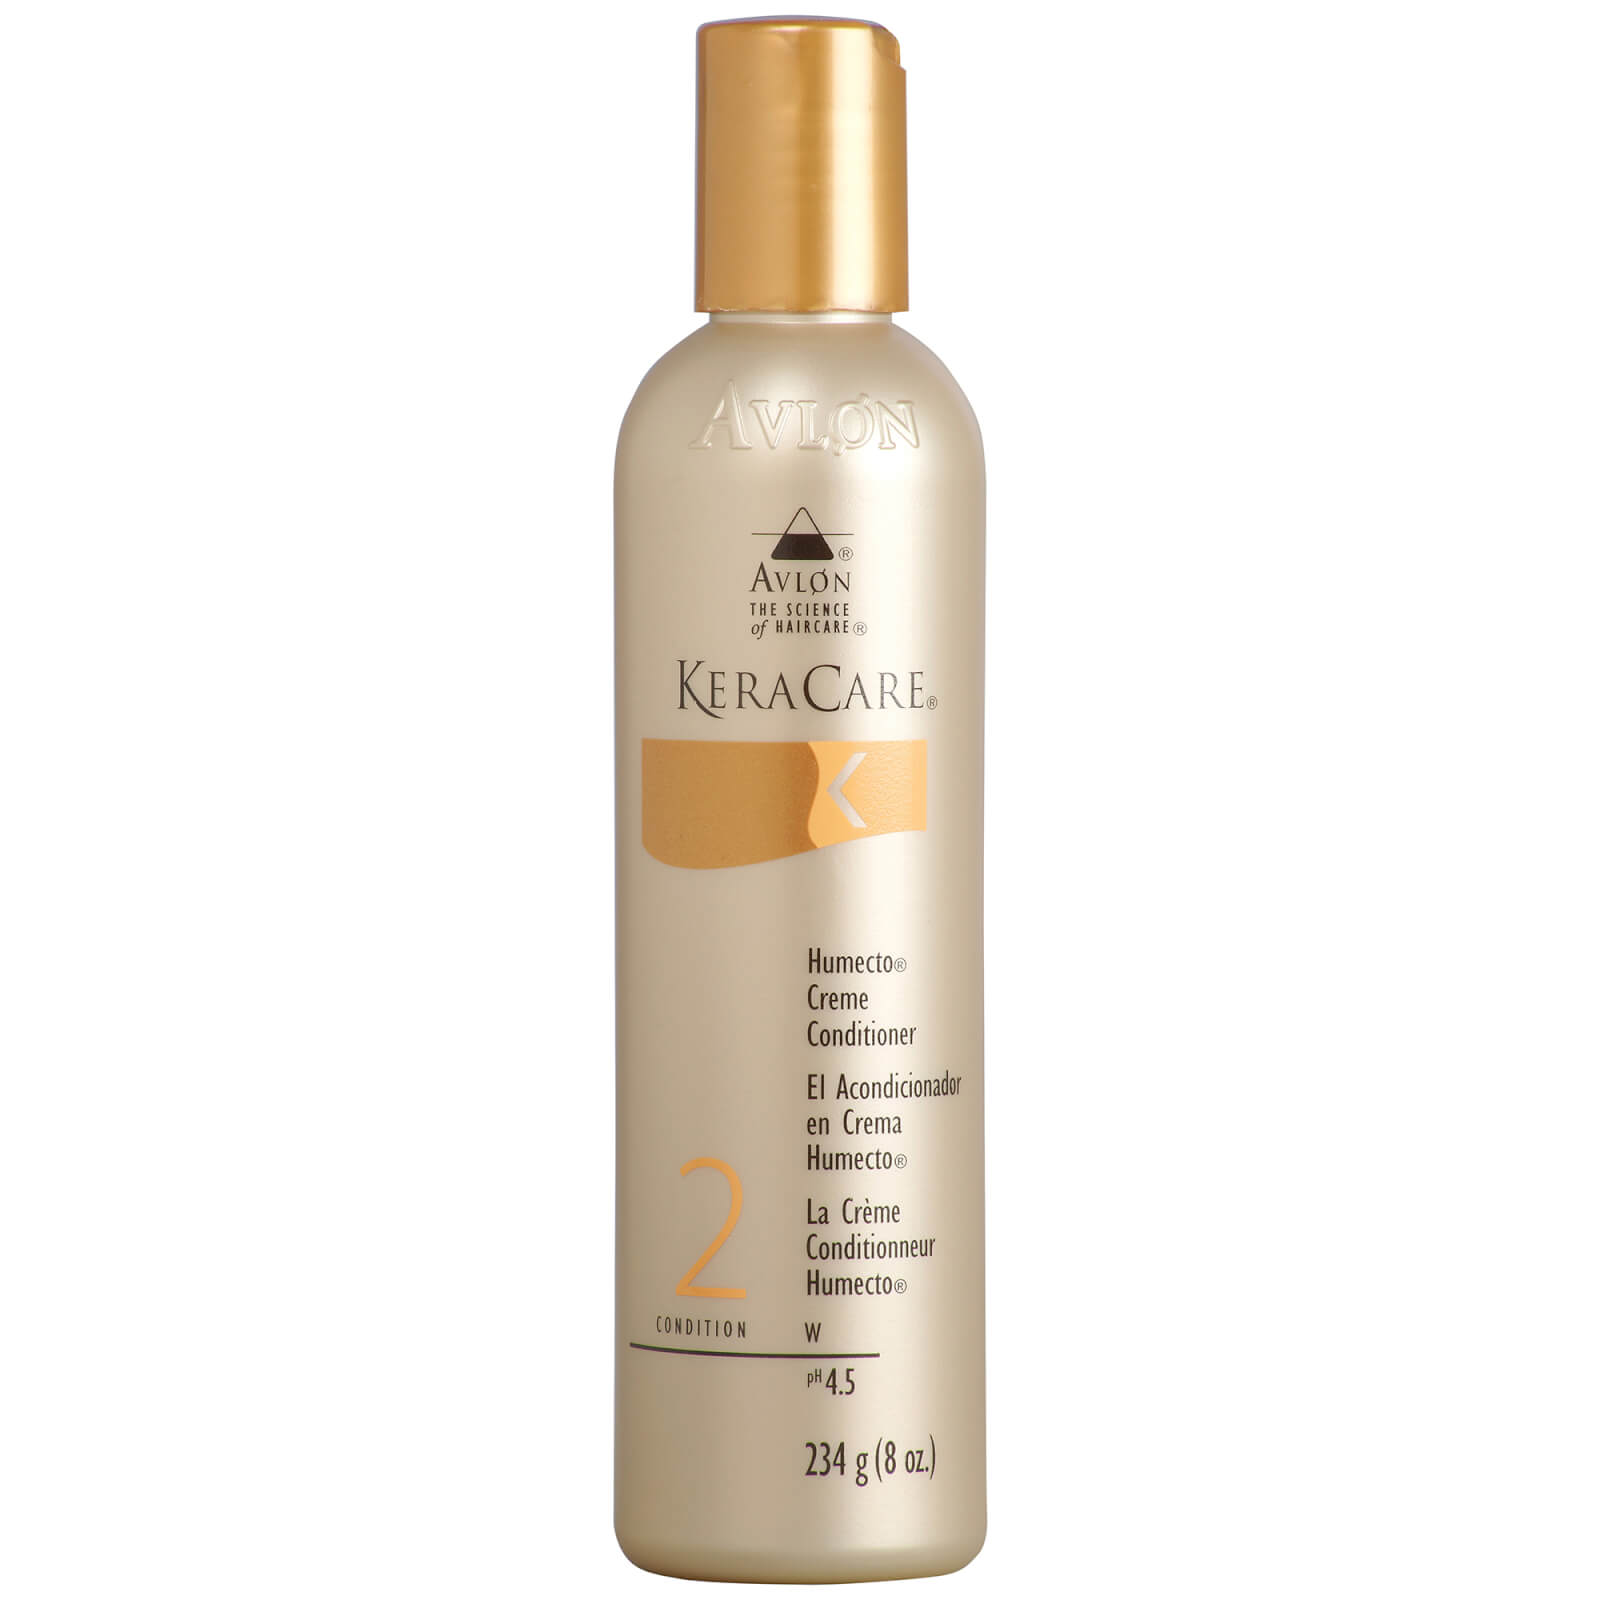 KeraCare Humecto Creme Conditioner 234g